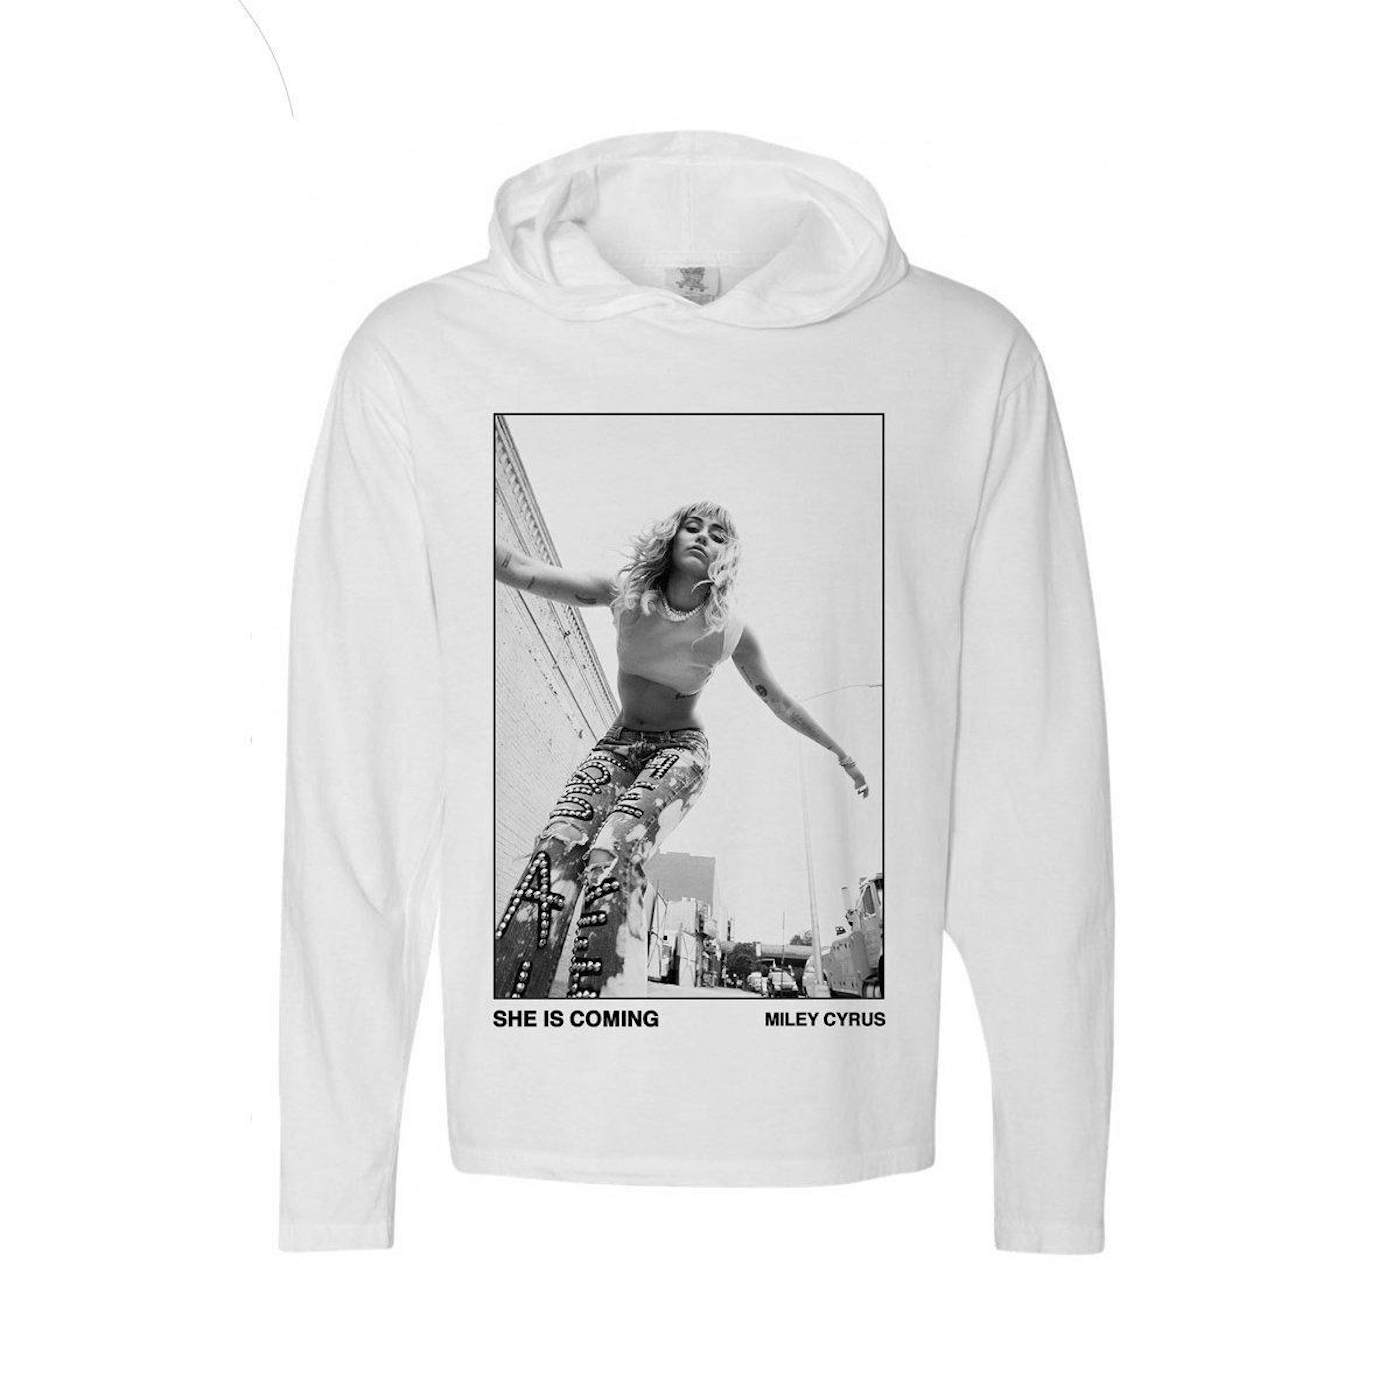 Miley Cyrus She Is Coming Photo Pullover Long Sleeve Tee White